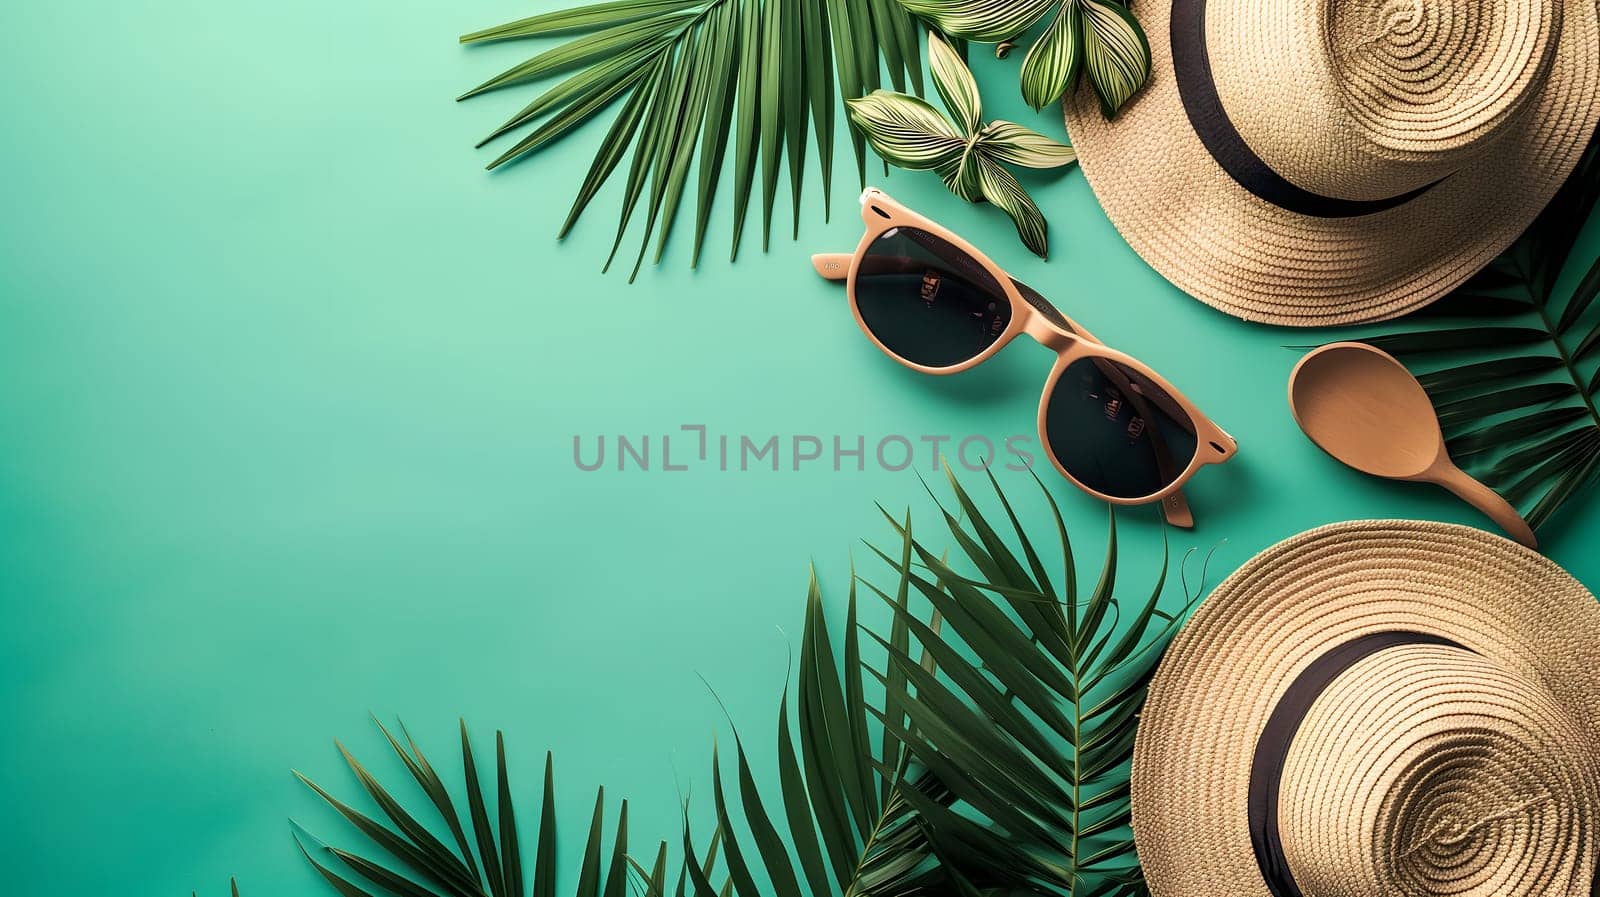 Hats, sunglasses, palm tree leaves on blue background. Blank, top view, still life, flat lay. Sea vacation travel concept tourism and resorts. Summer holidays. by z1b